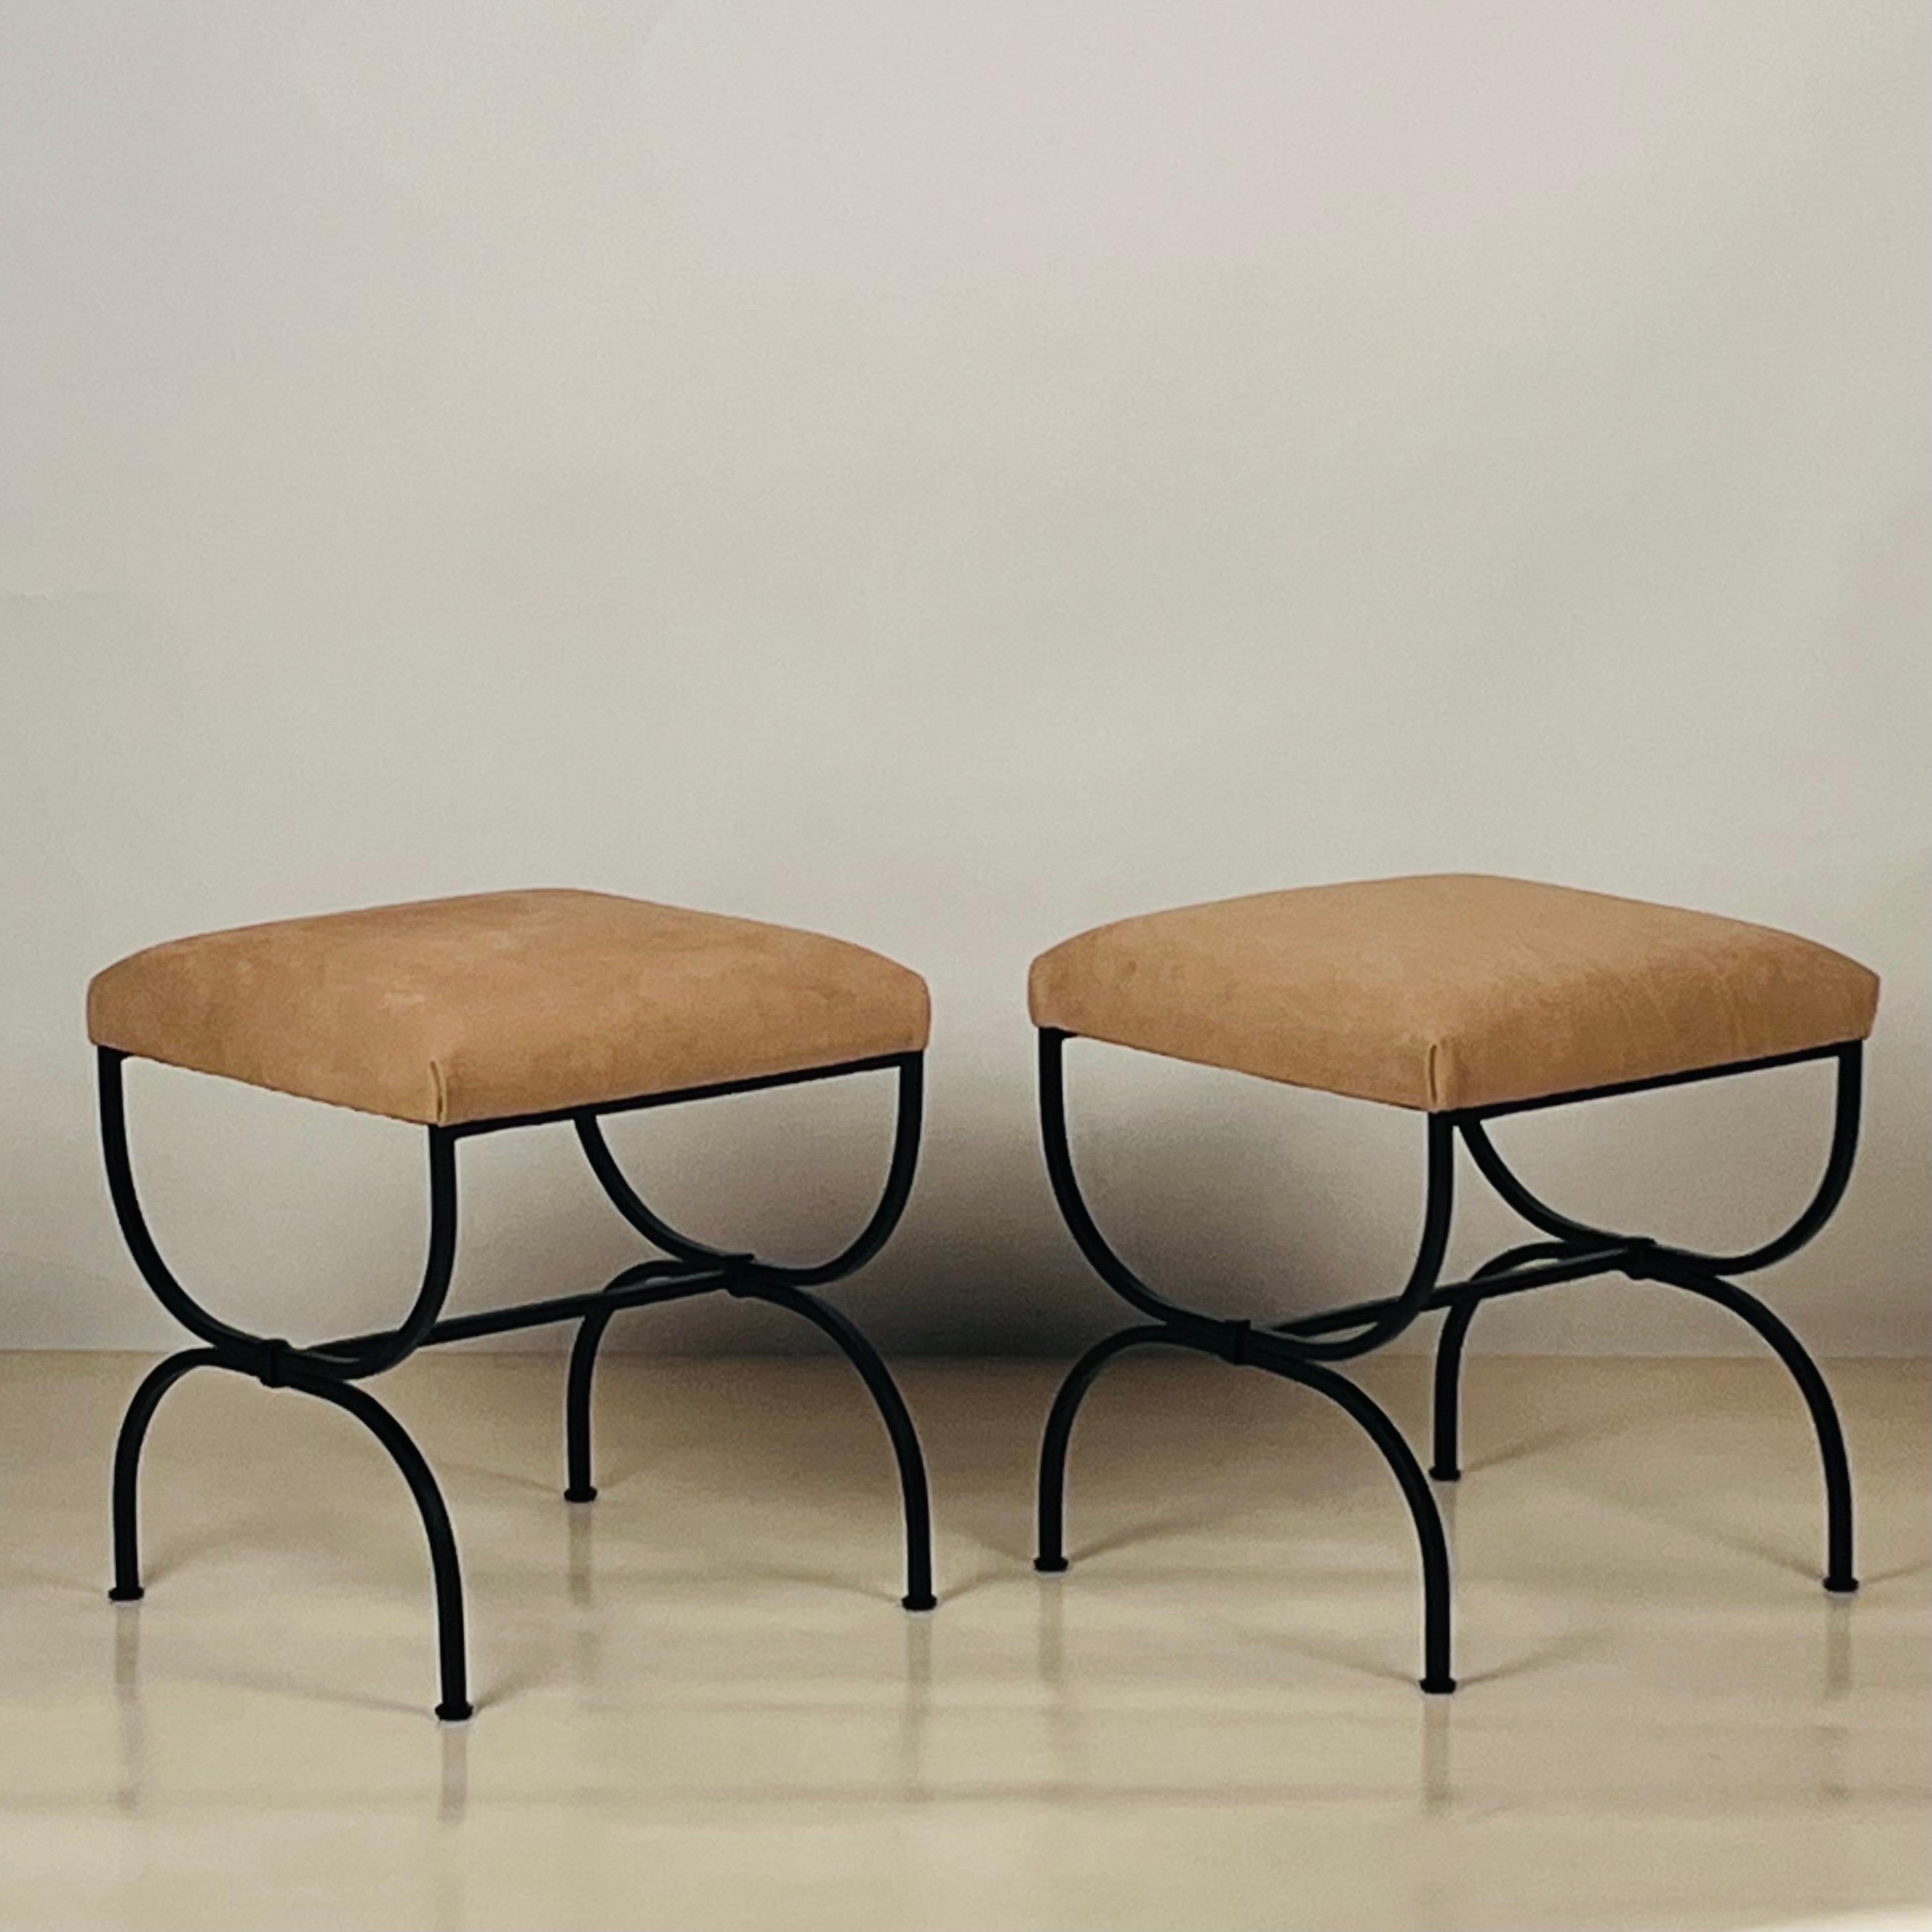 Pair of 'Strapontin' Wrought Iron Stools in Cognac Nubuck Leather by DESIGN FRÈRES®.

Nubuck is top-grain leather that has been sanded or buffed on the grain side, or outside, to give a slight nap of short protein fibers, producing a velvet-like